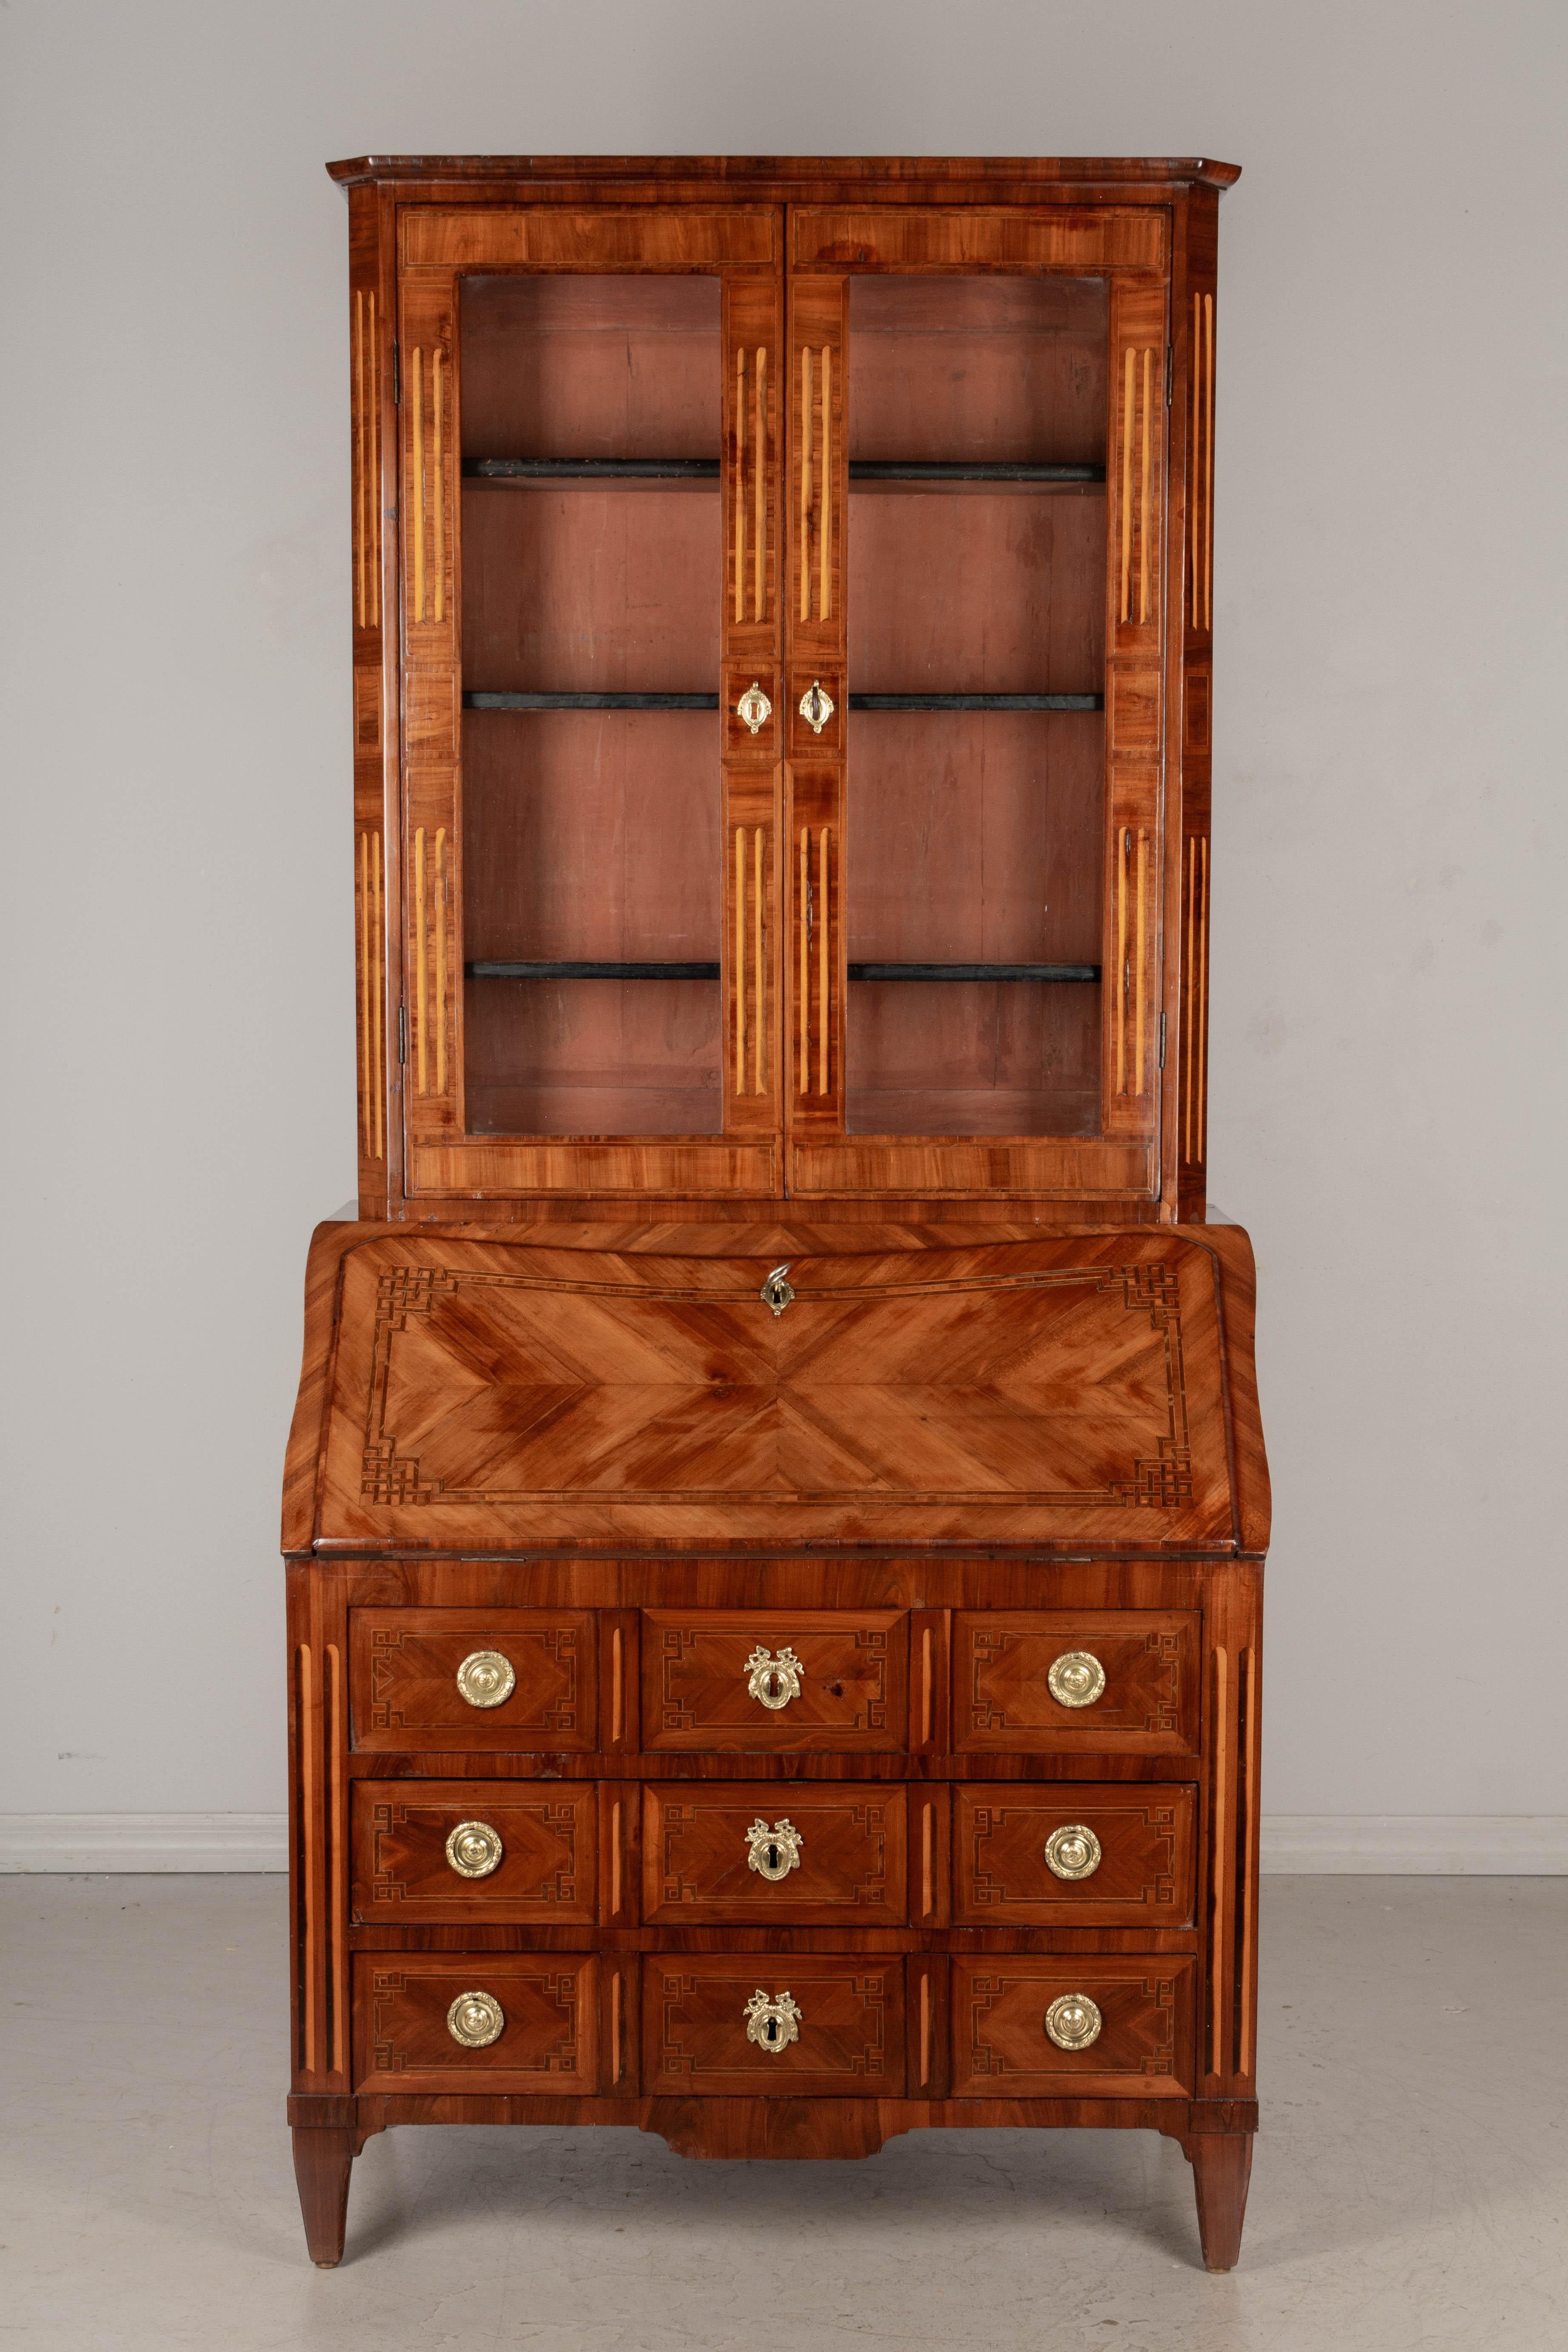 18th Century French Louis XVI Marquetry Secretaire or Desk For Sale 1